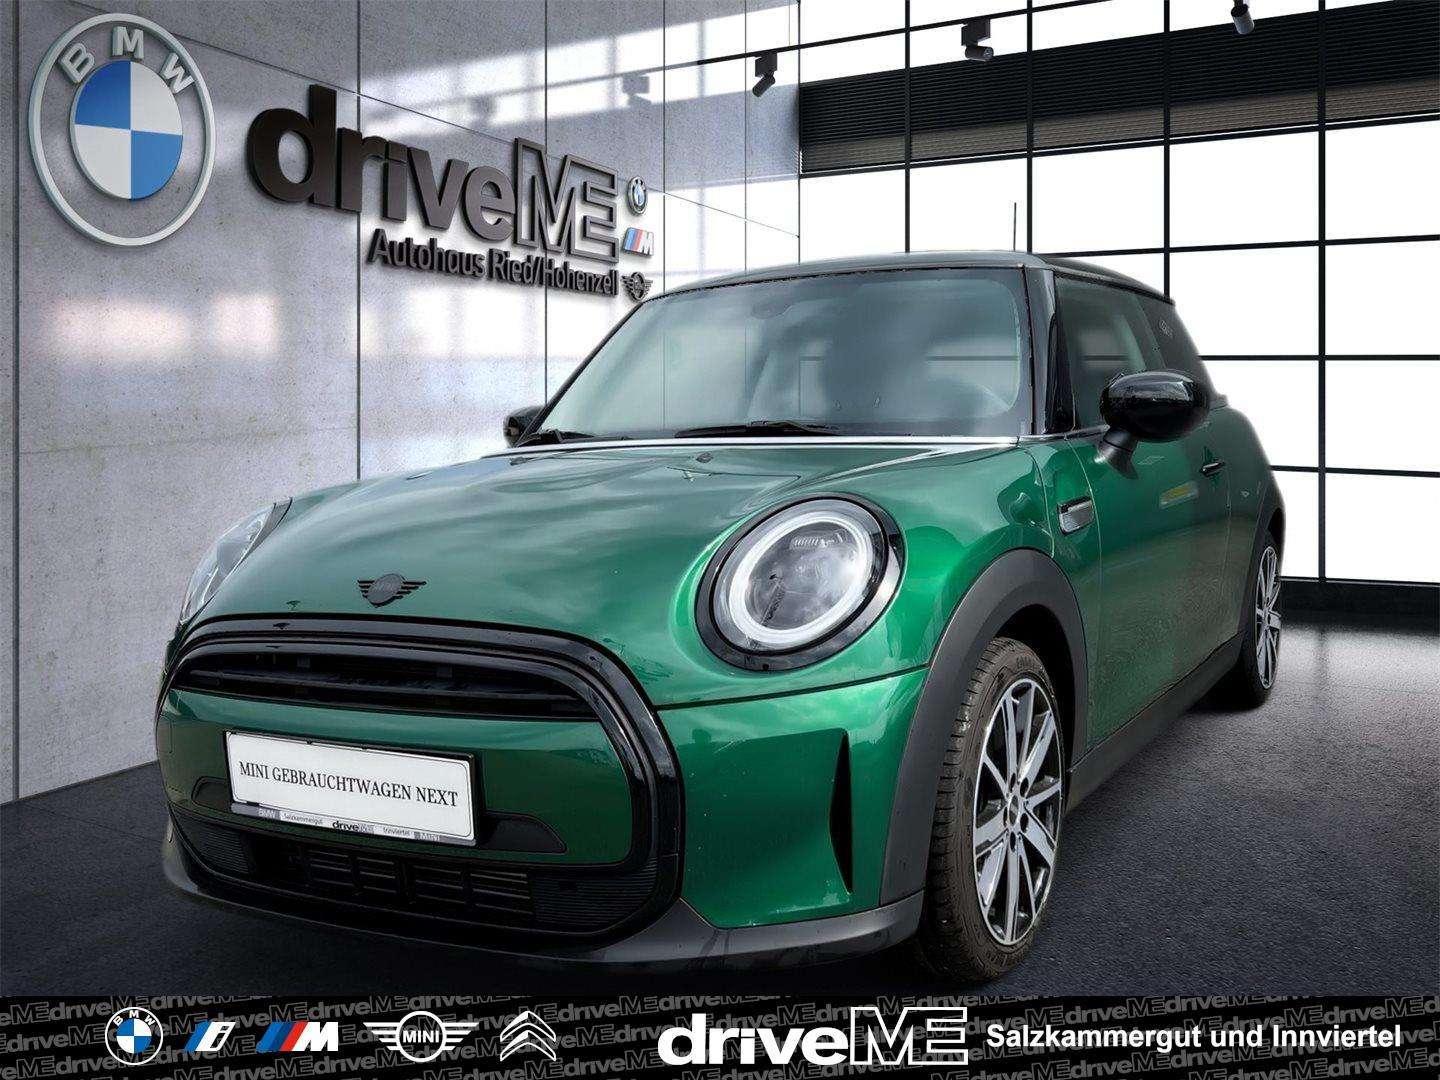 MINI Cooper Coupe in Green used in Hohenzell for € 26,900.-